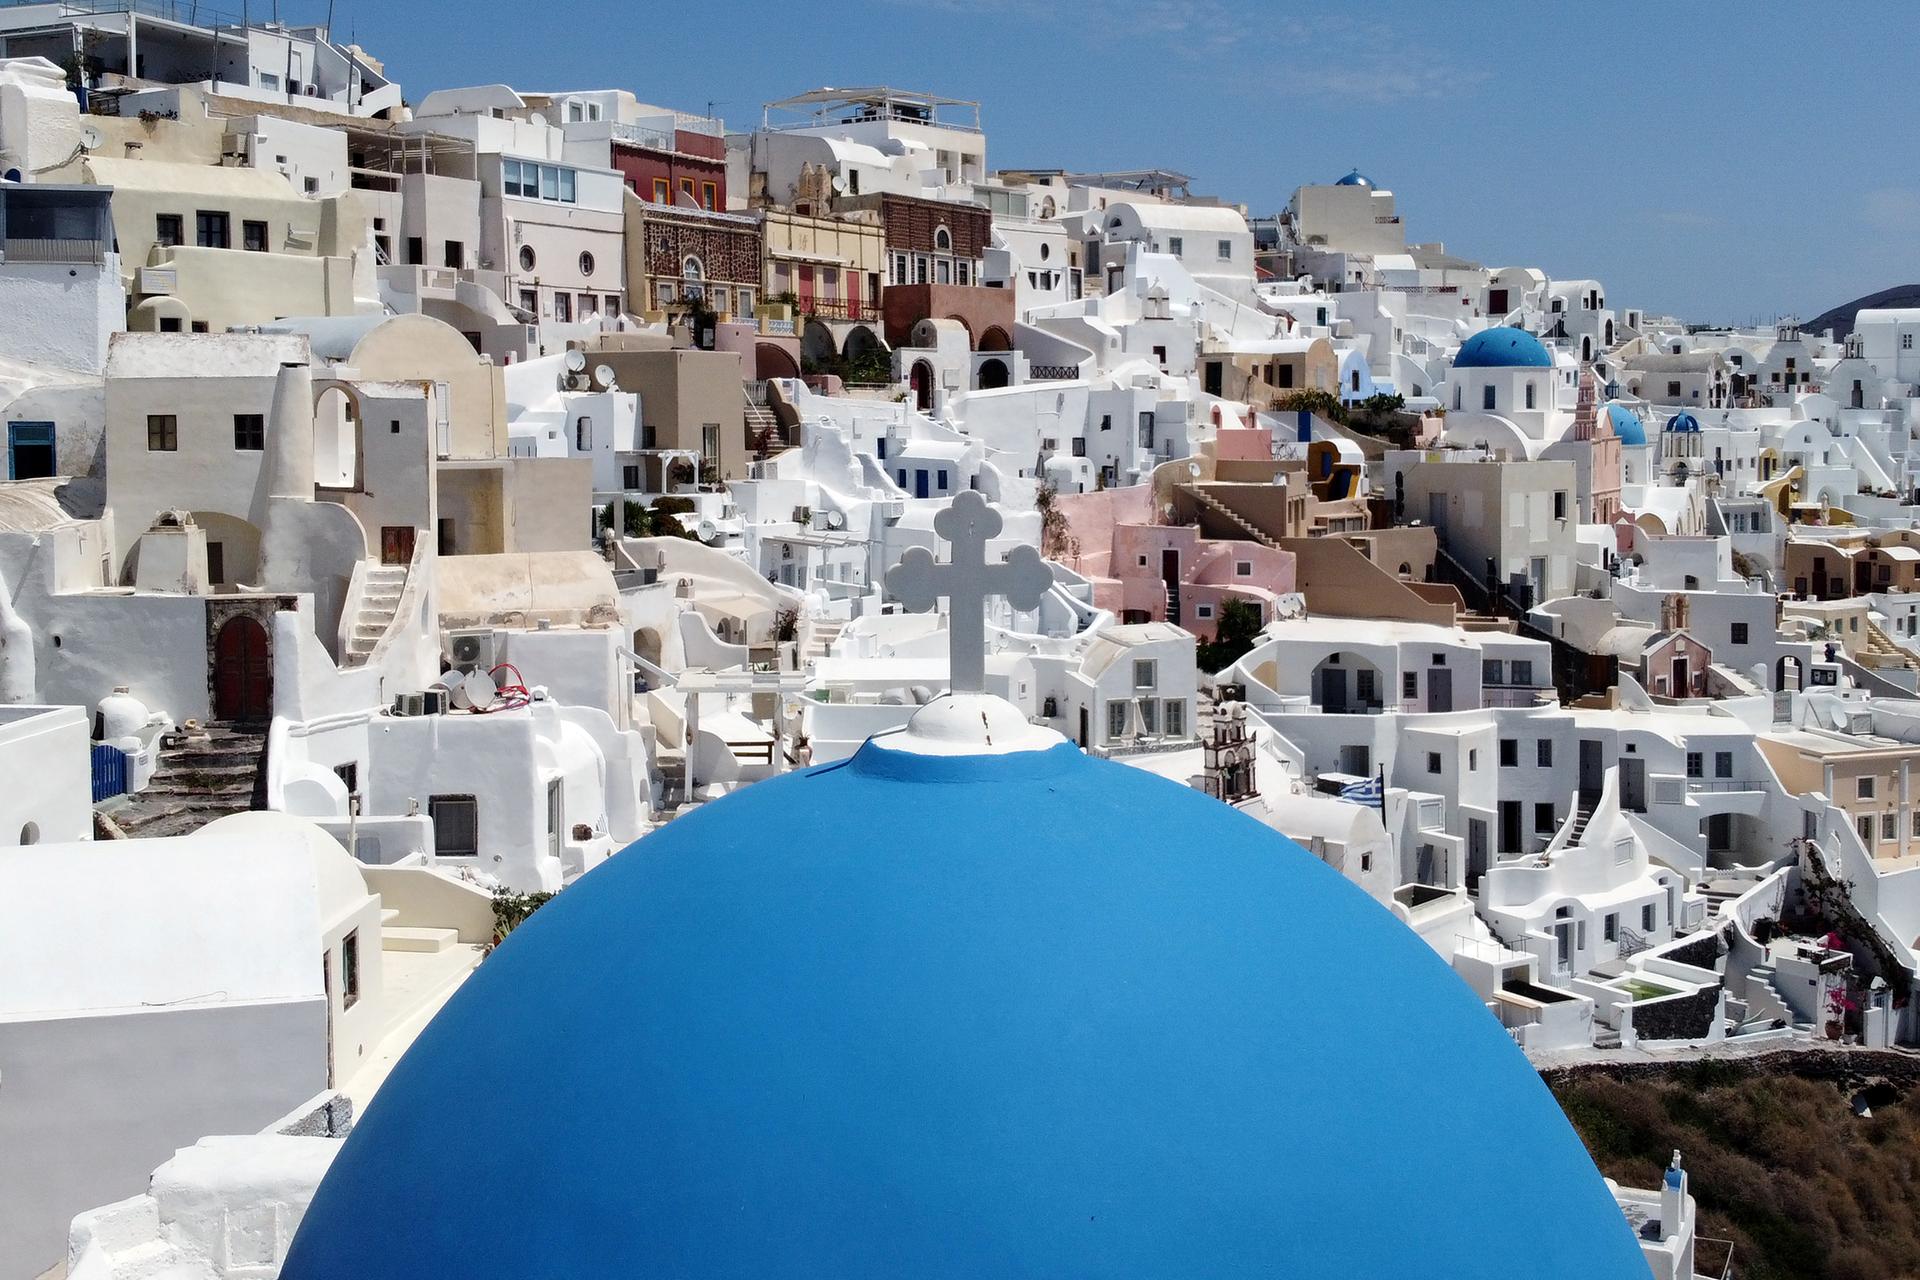 Greece to open to tourists from 29 countries from June 15